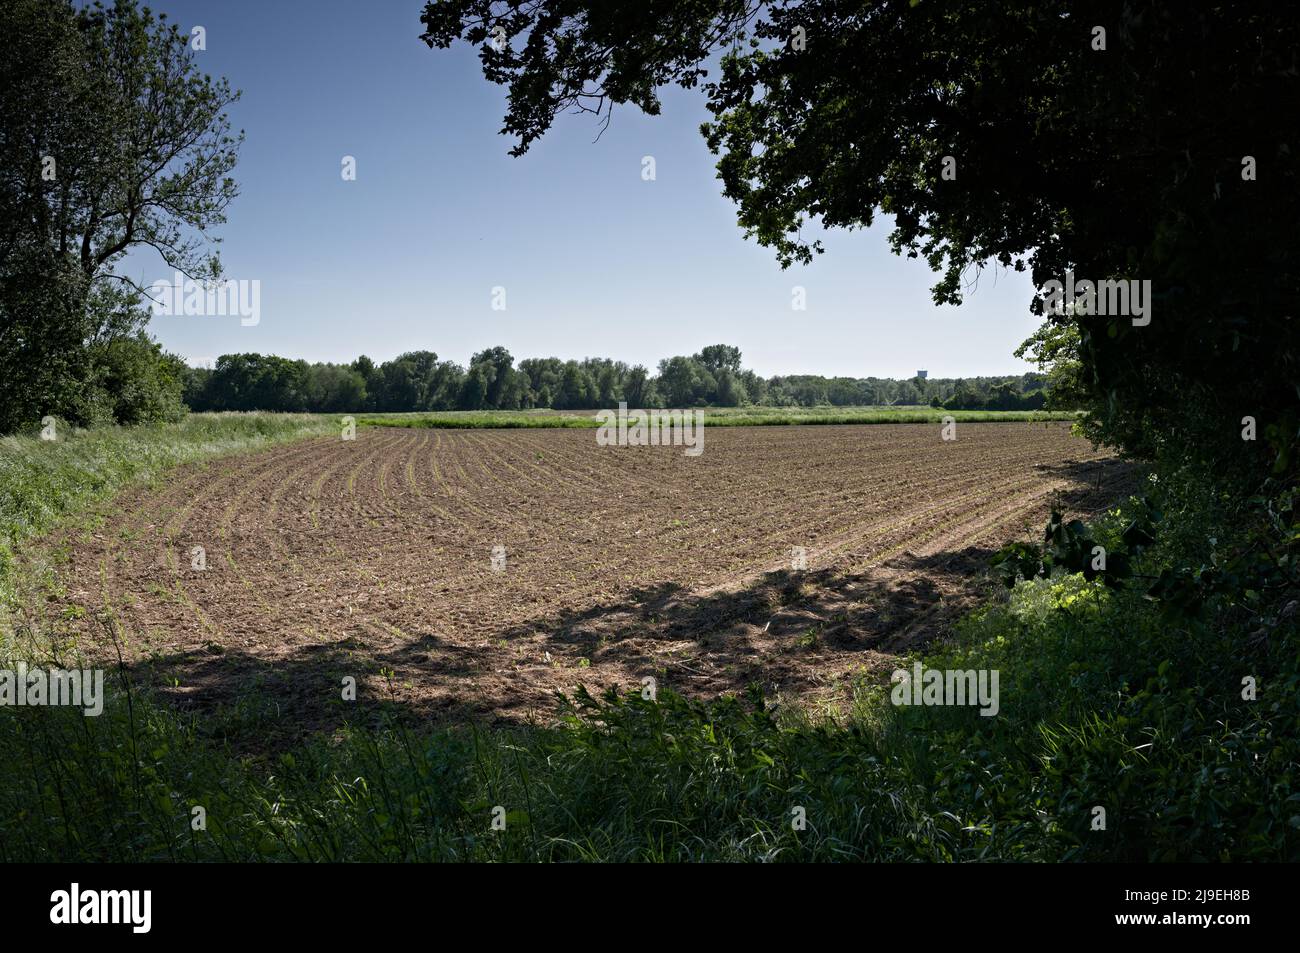 Lines and curves of a fresh prepared field Stock Photo